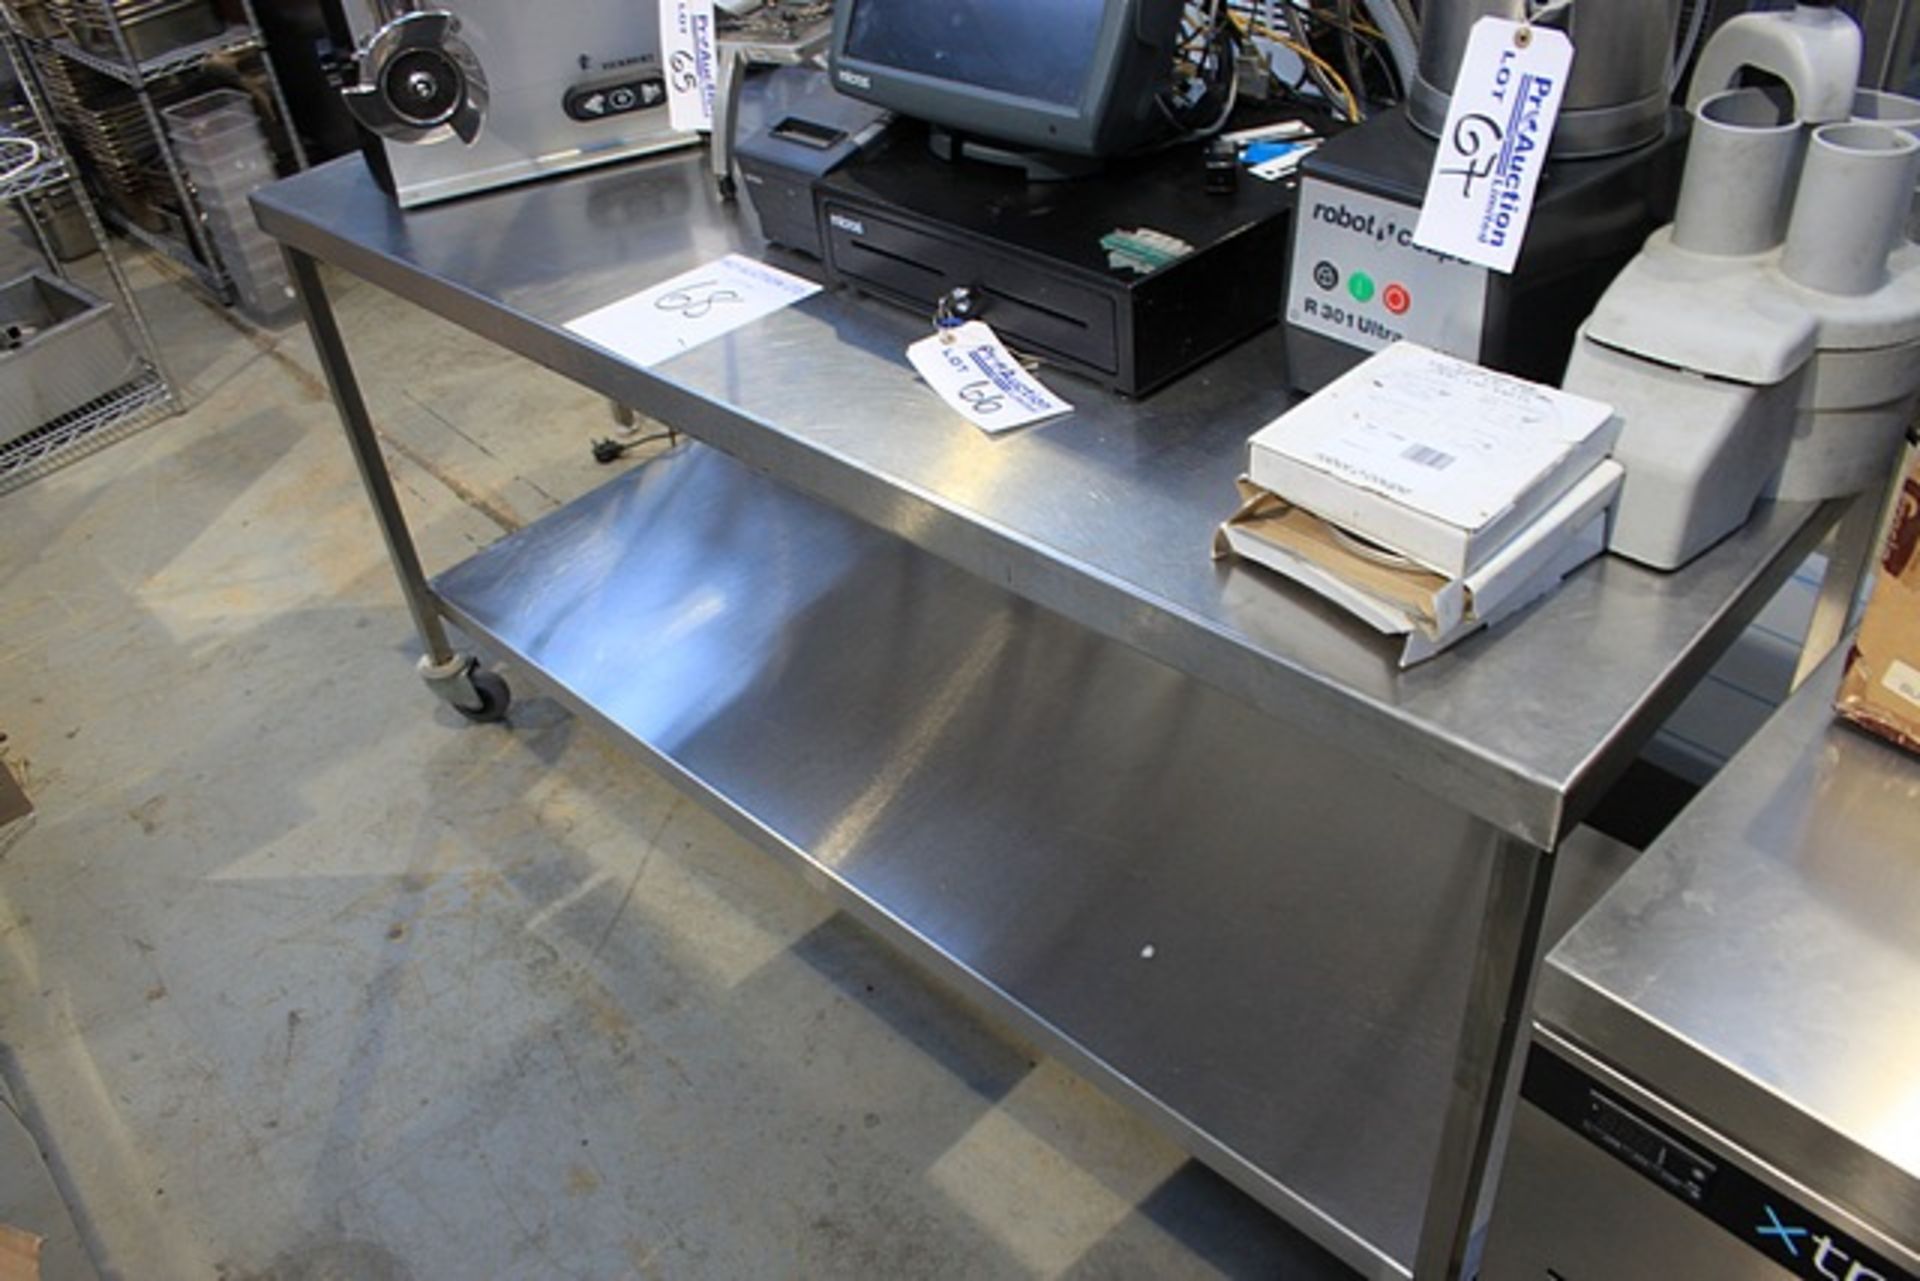 Stainless steel mobile prep table with under shelf 1800mm x 700mm